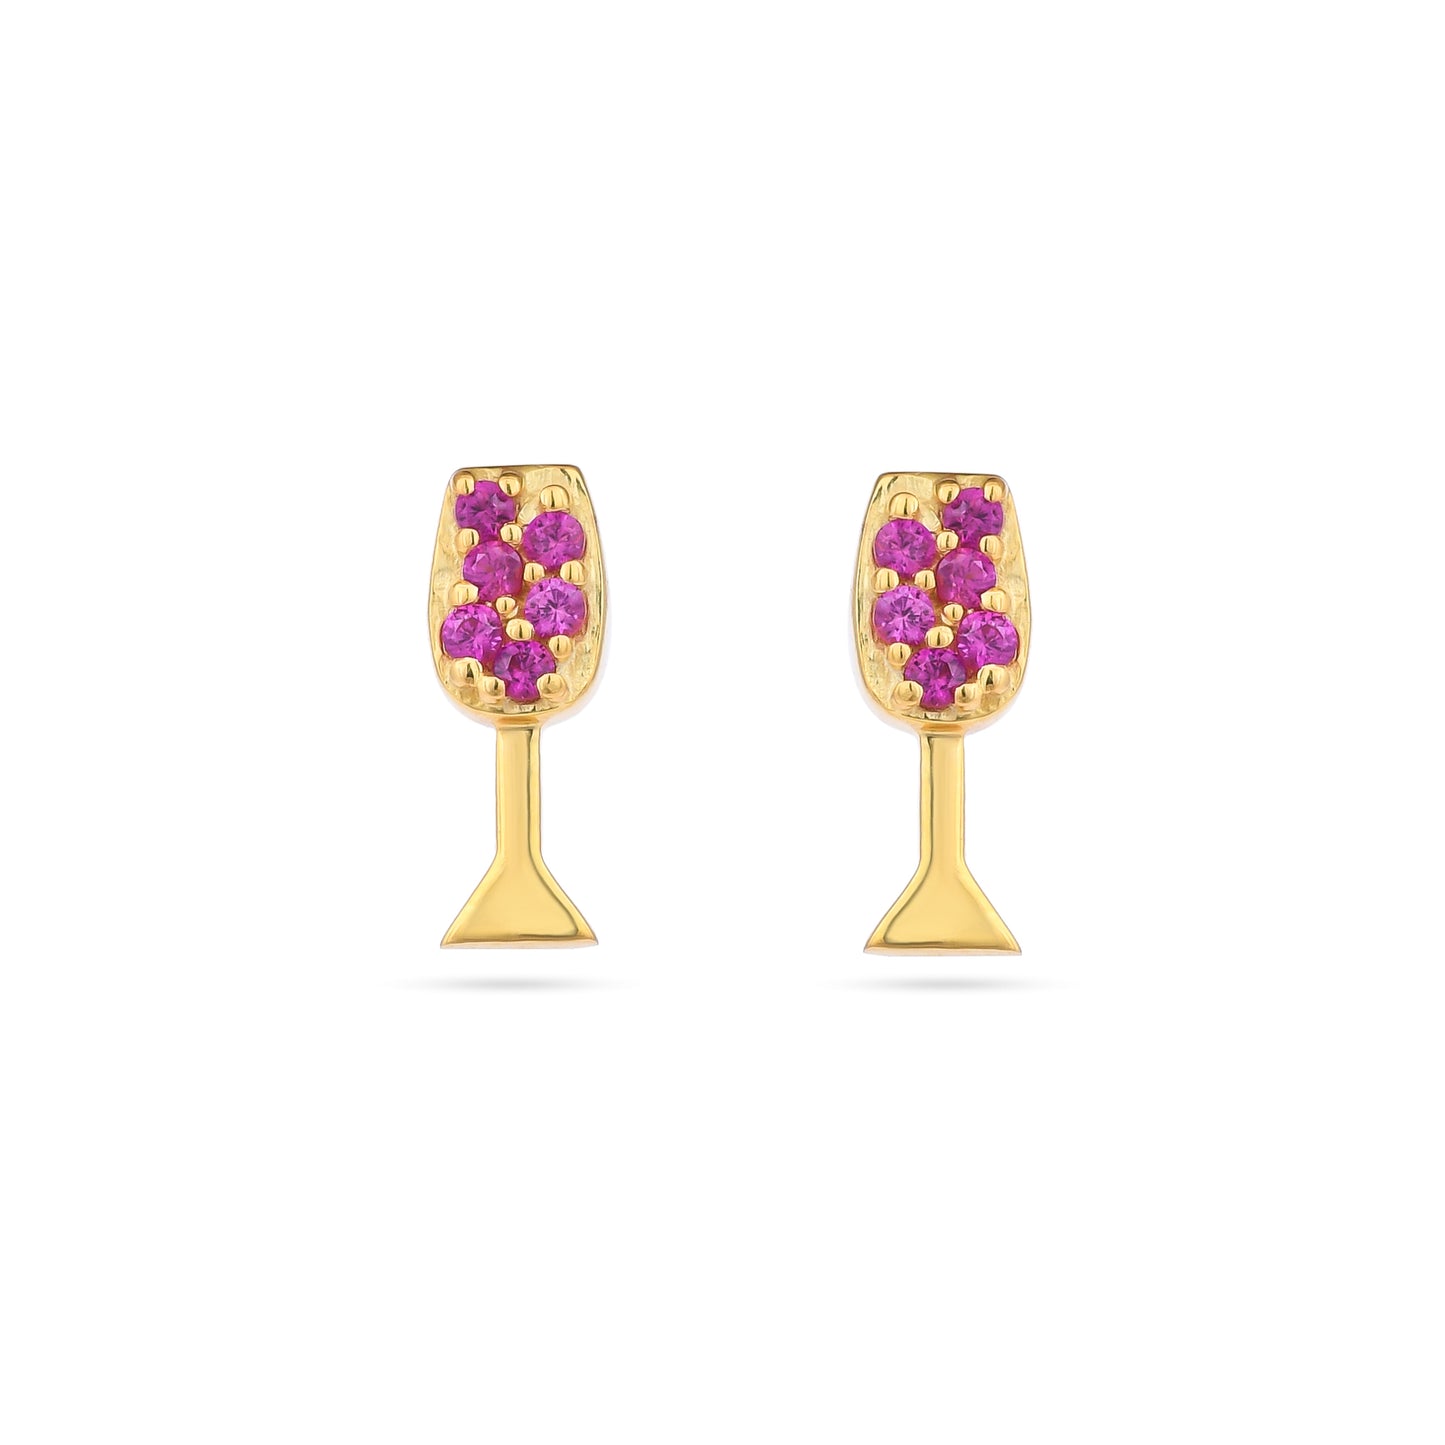 Party Wine Glass Tiny Stud Earrings| Red & White Wine - From Purl Purl